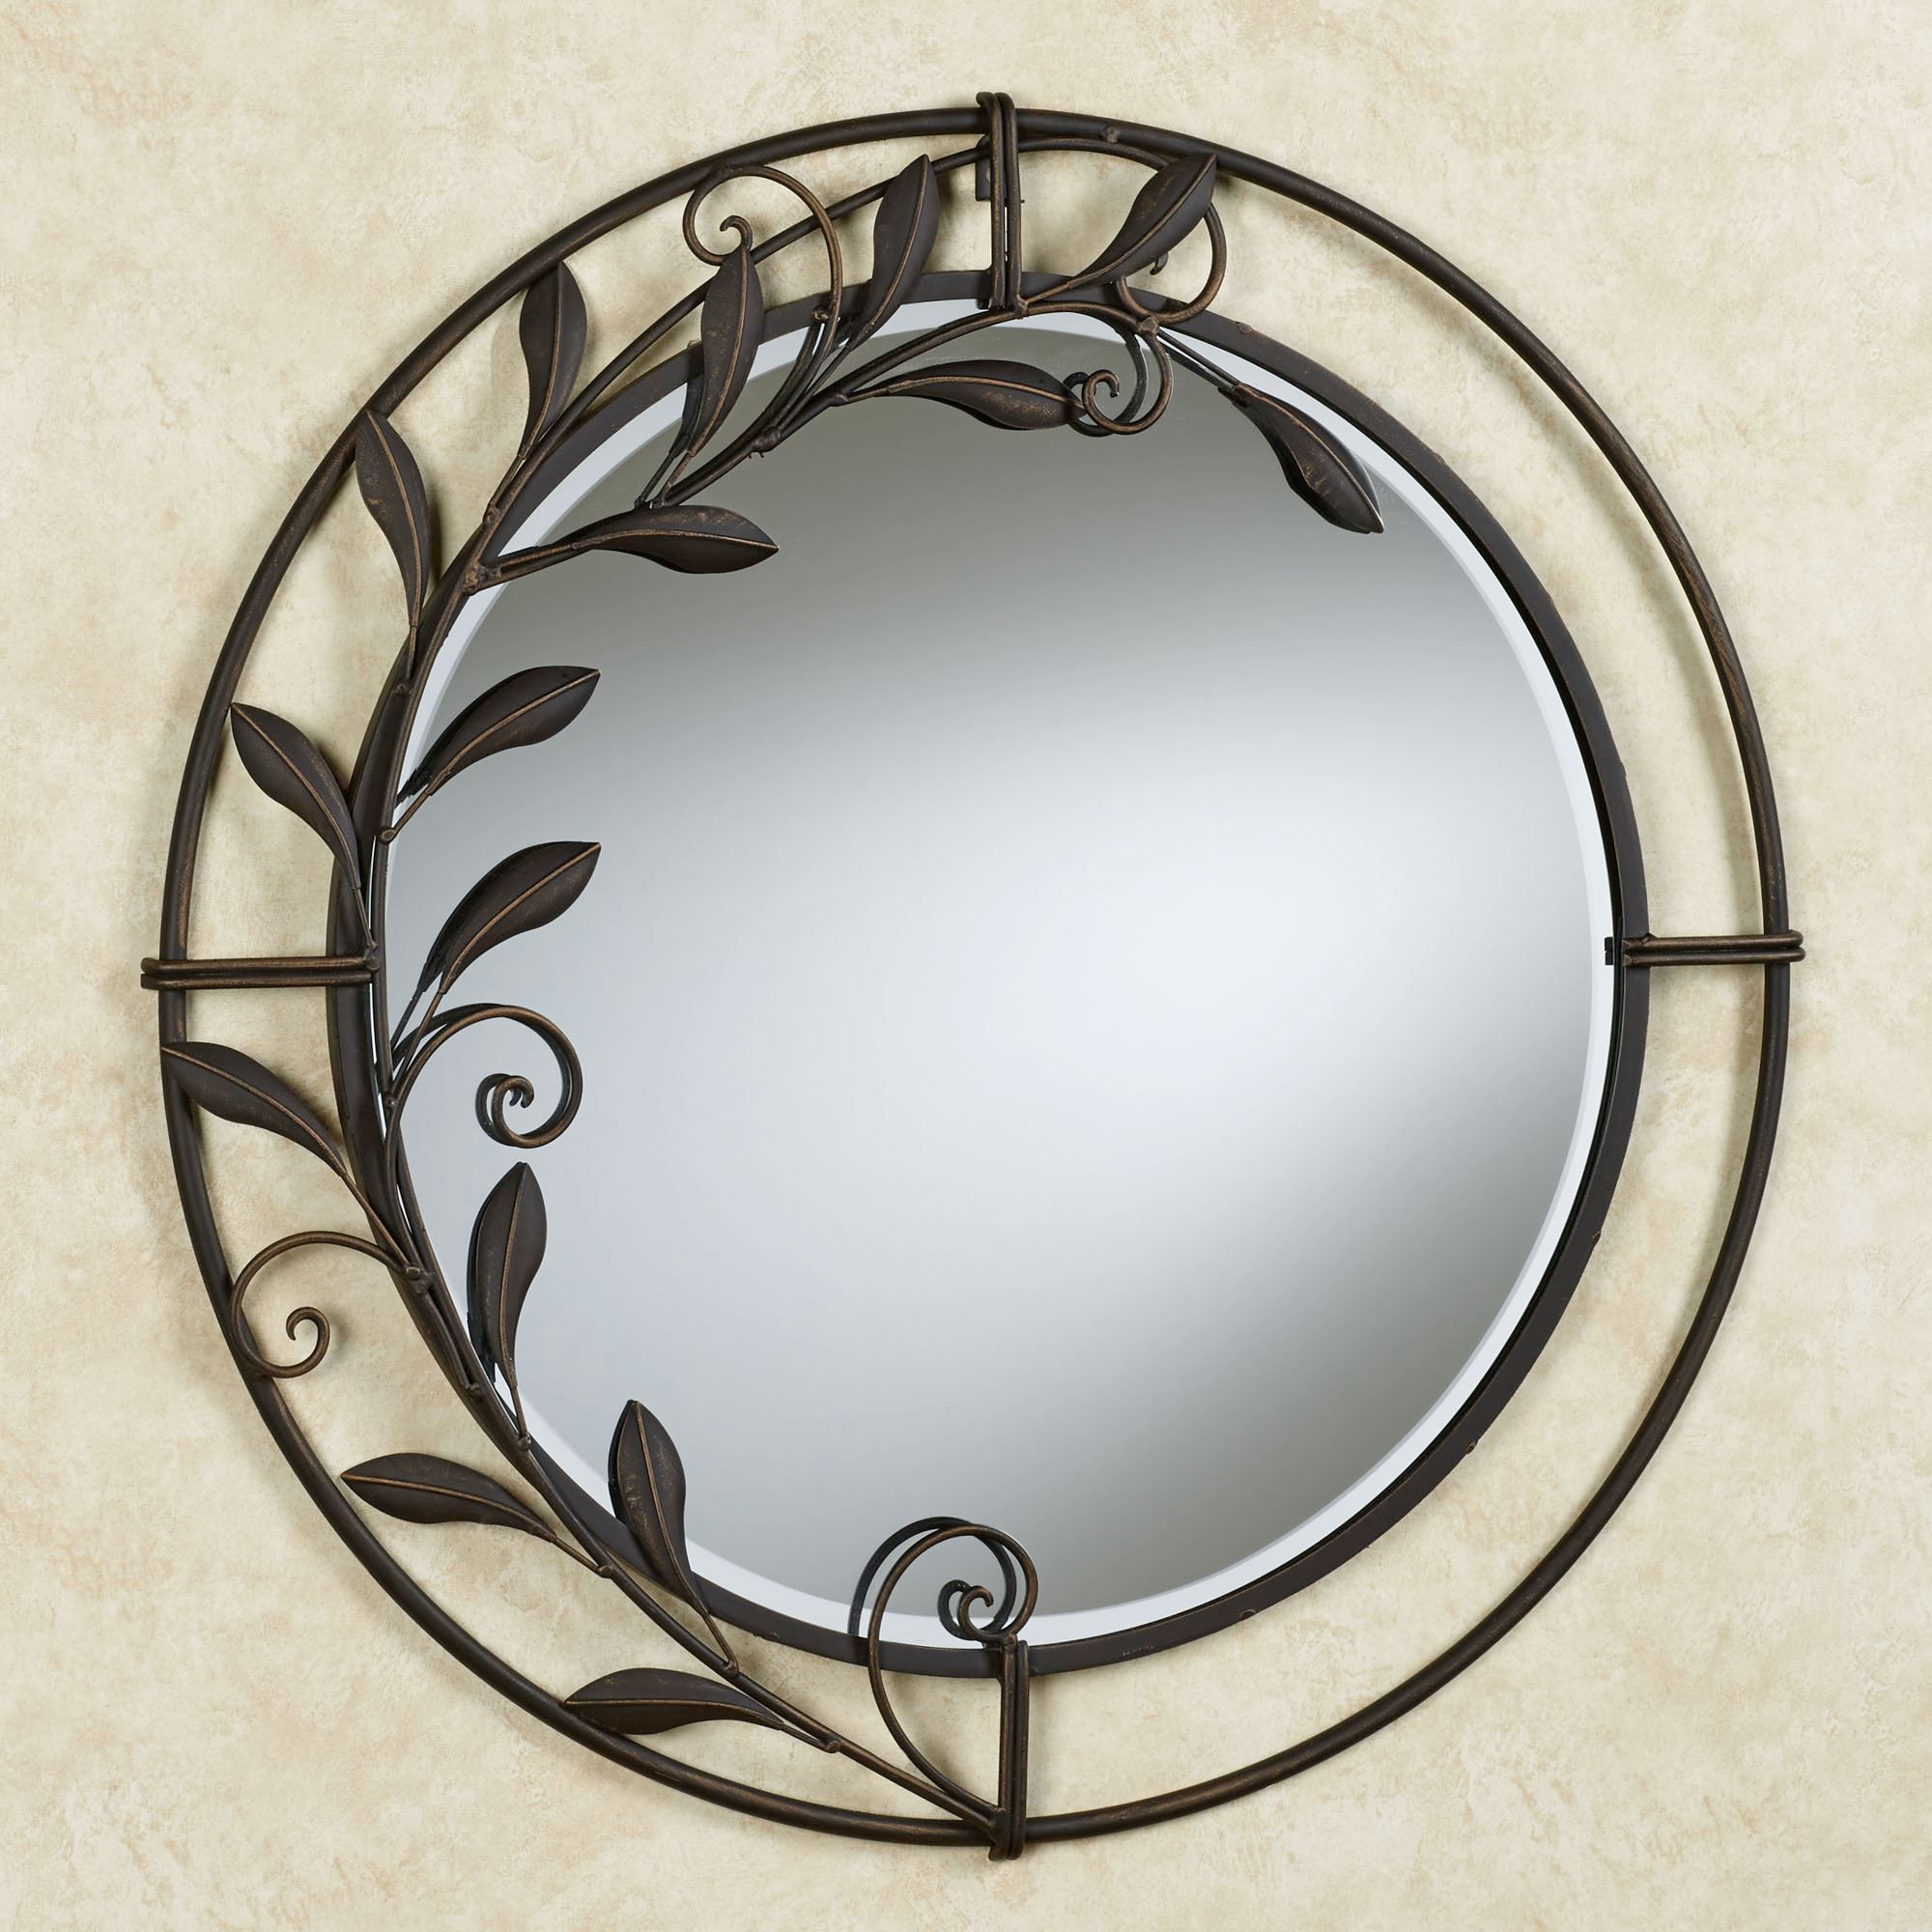 Galeazzo Round Mirror Antique Bronze In Woven Bronze Metal Wall Mirrors (View 5 of 15)